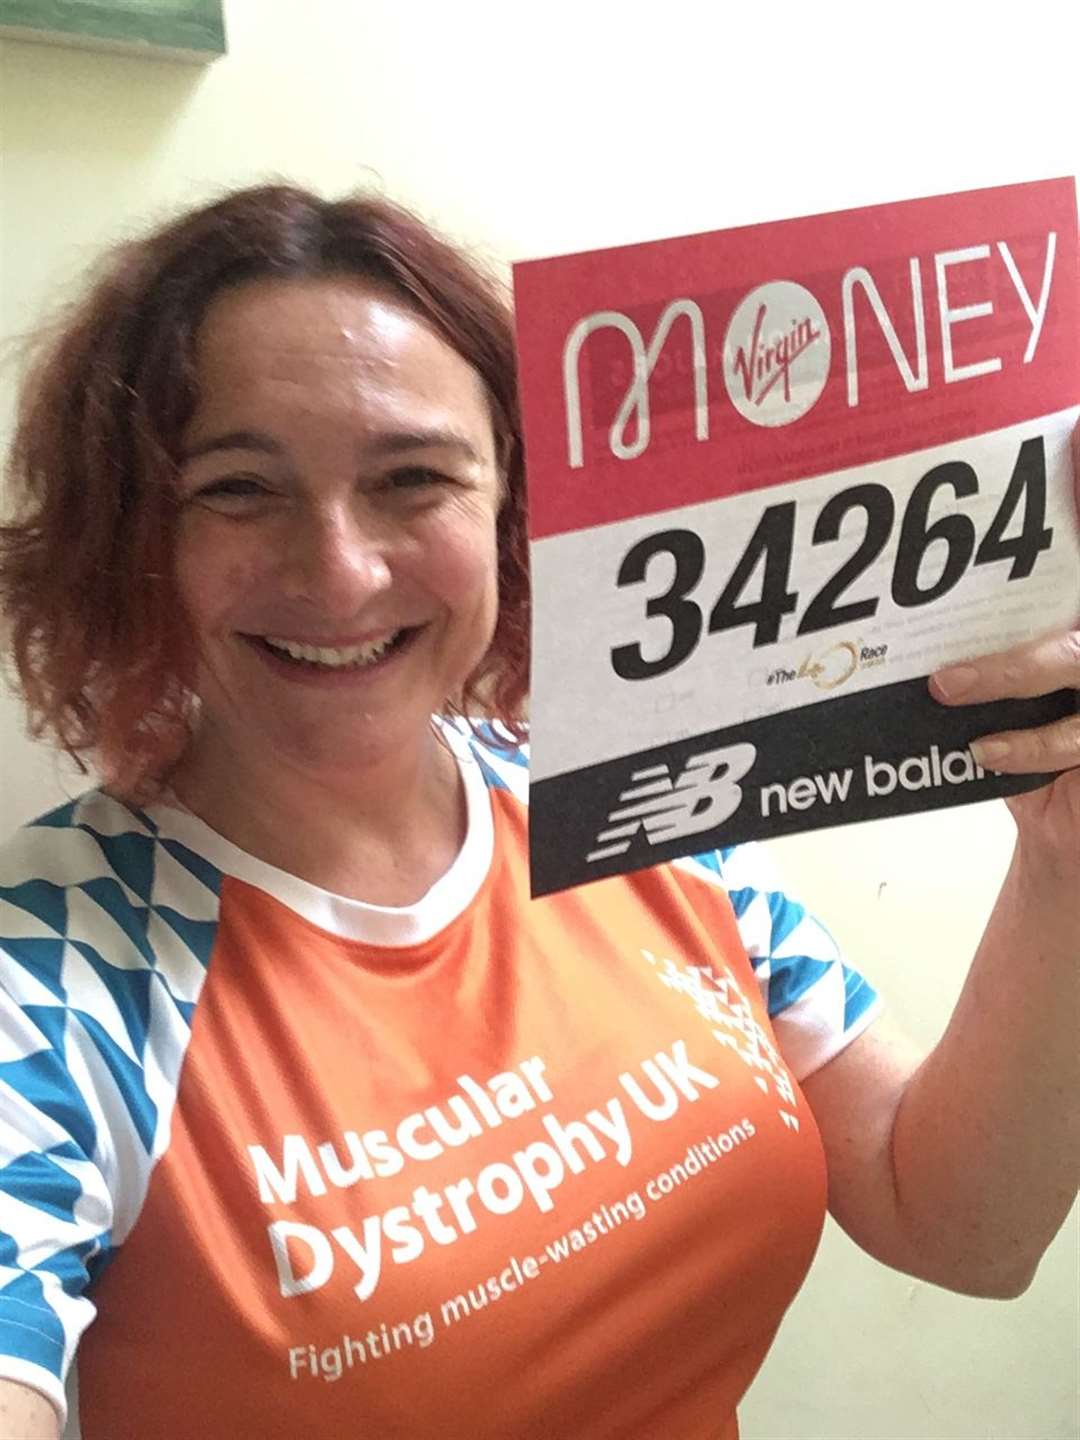 Catherine Woodhead, chief executive of Muscular Dystrophy UK, who walked the 2020 Virgin Money London Marathon to raise money for the charity (Muscular Dystrophy UK/PA)